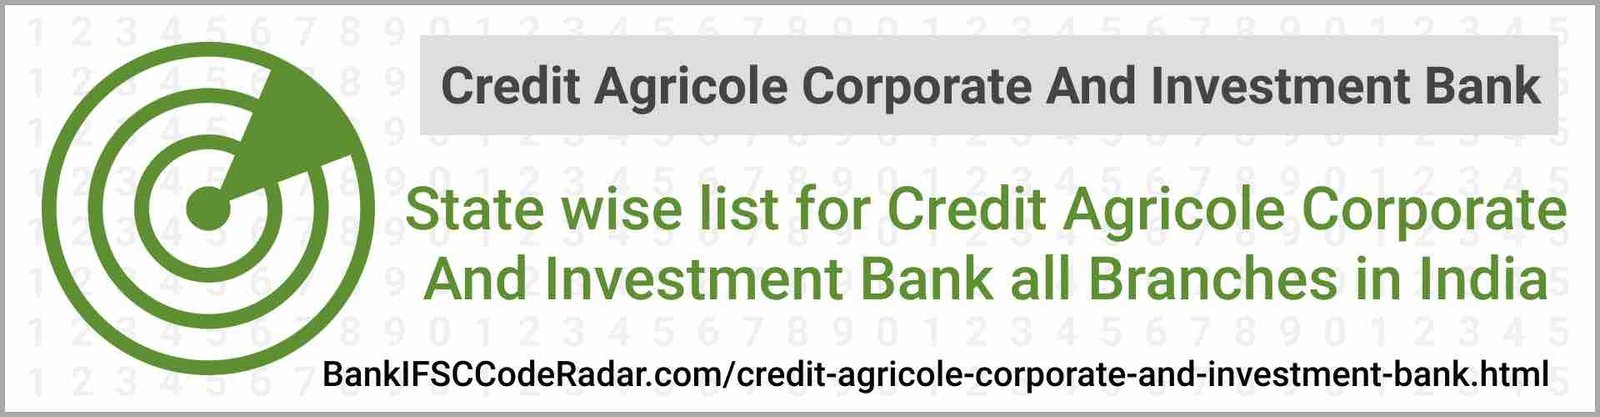 Credit Agricole Corporate And Investment Bank All Branches India